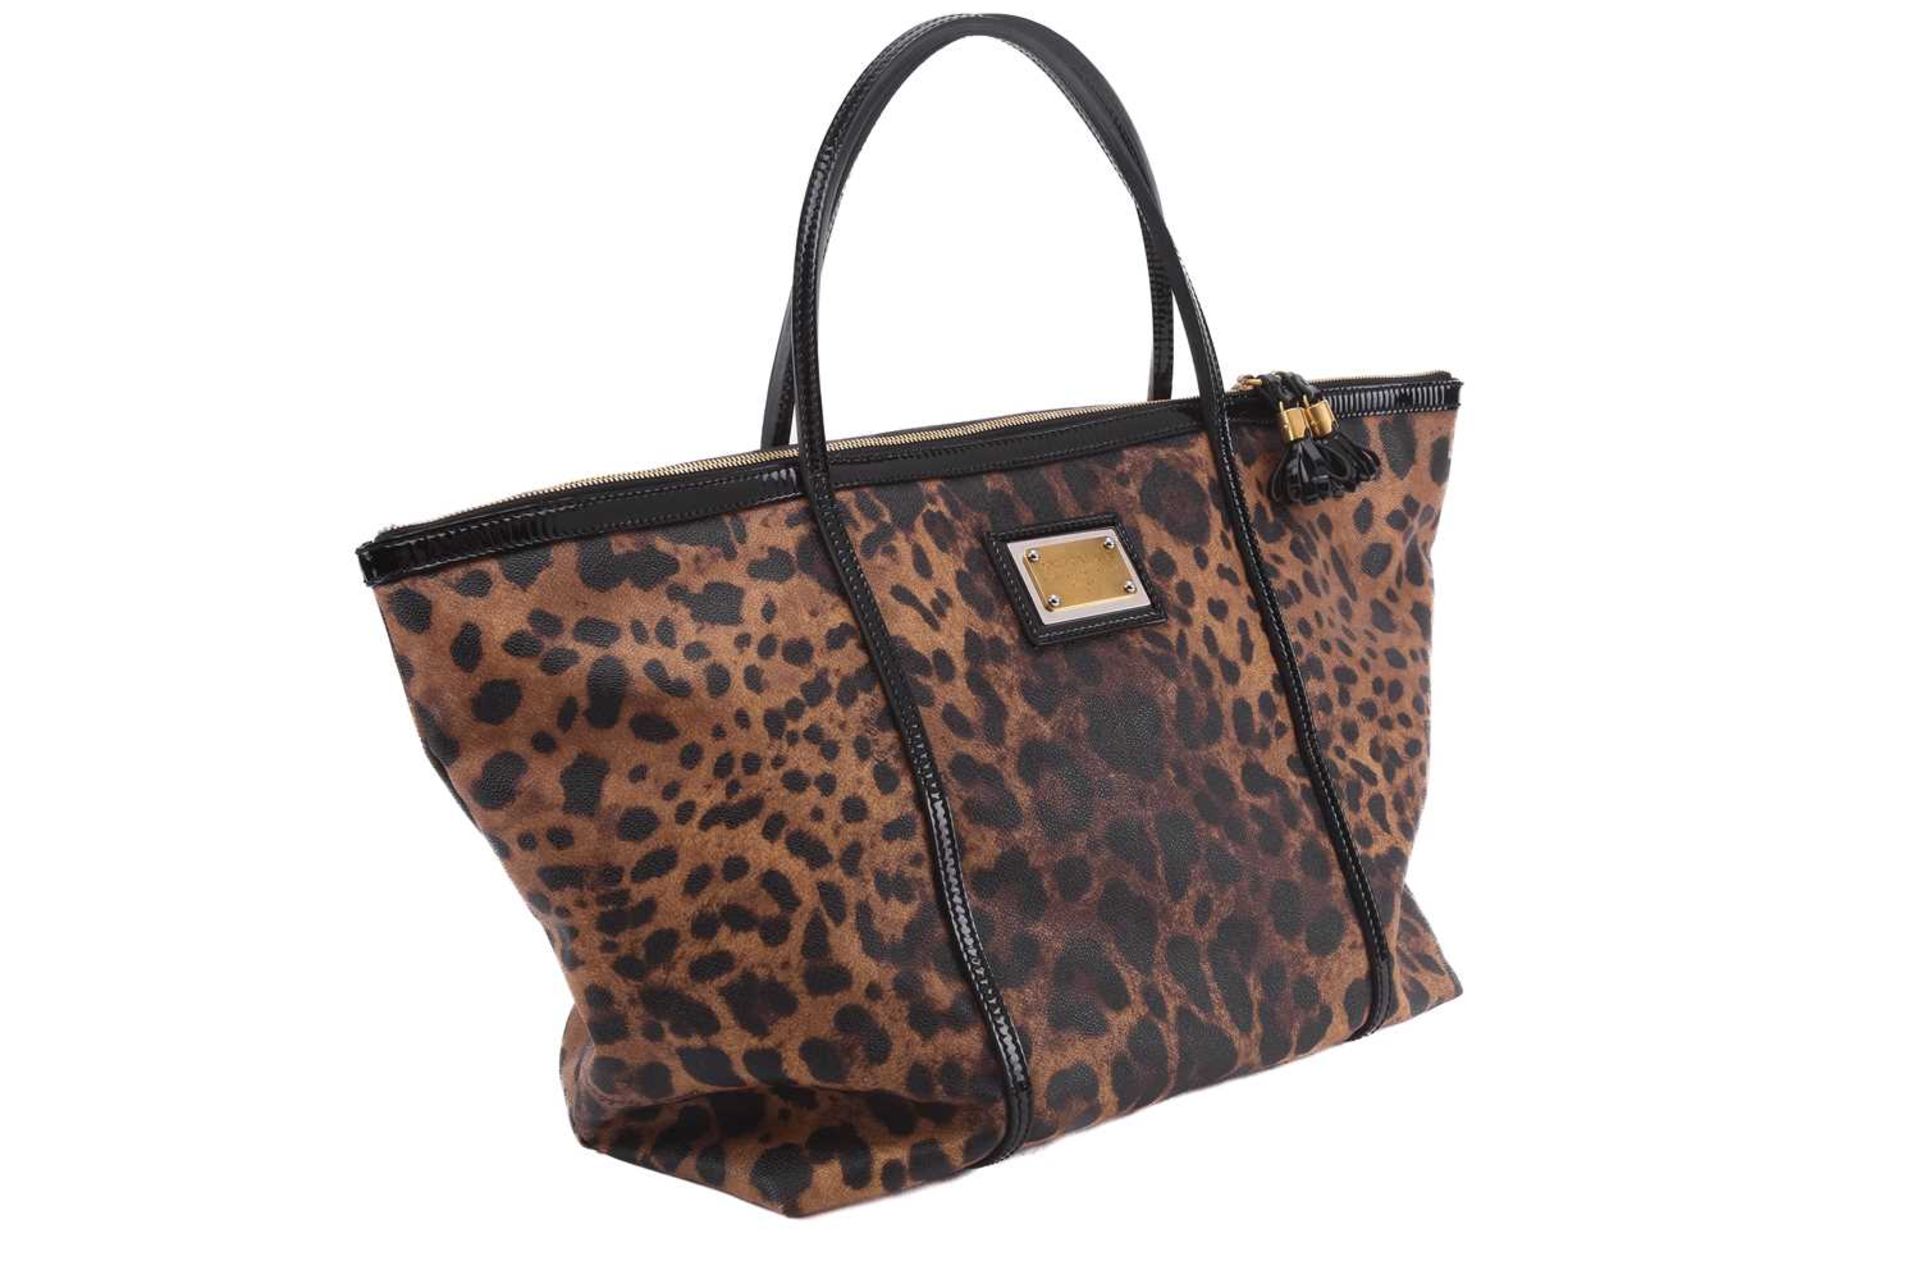 Dolce & Gabbana - a large leopard print 'Escape' shopper tote with black patent leather trims and - Image 4 of 13